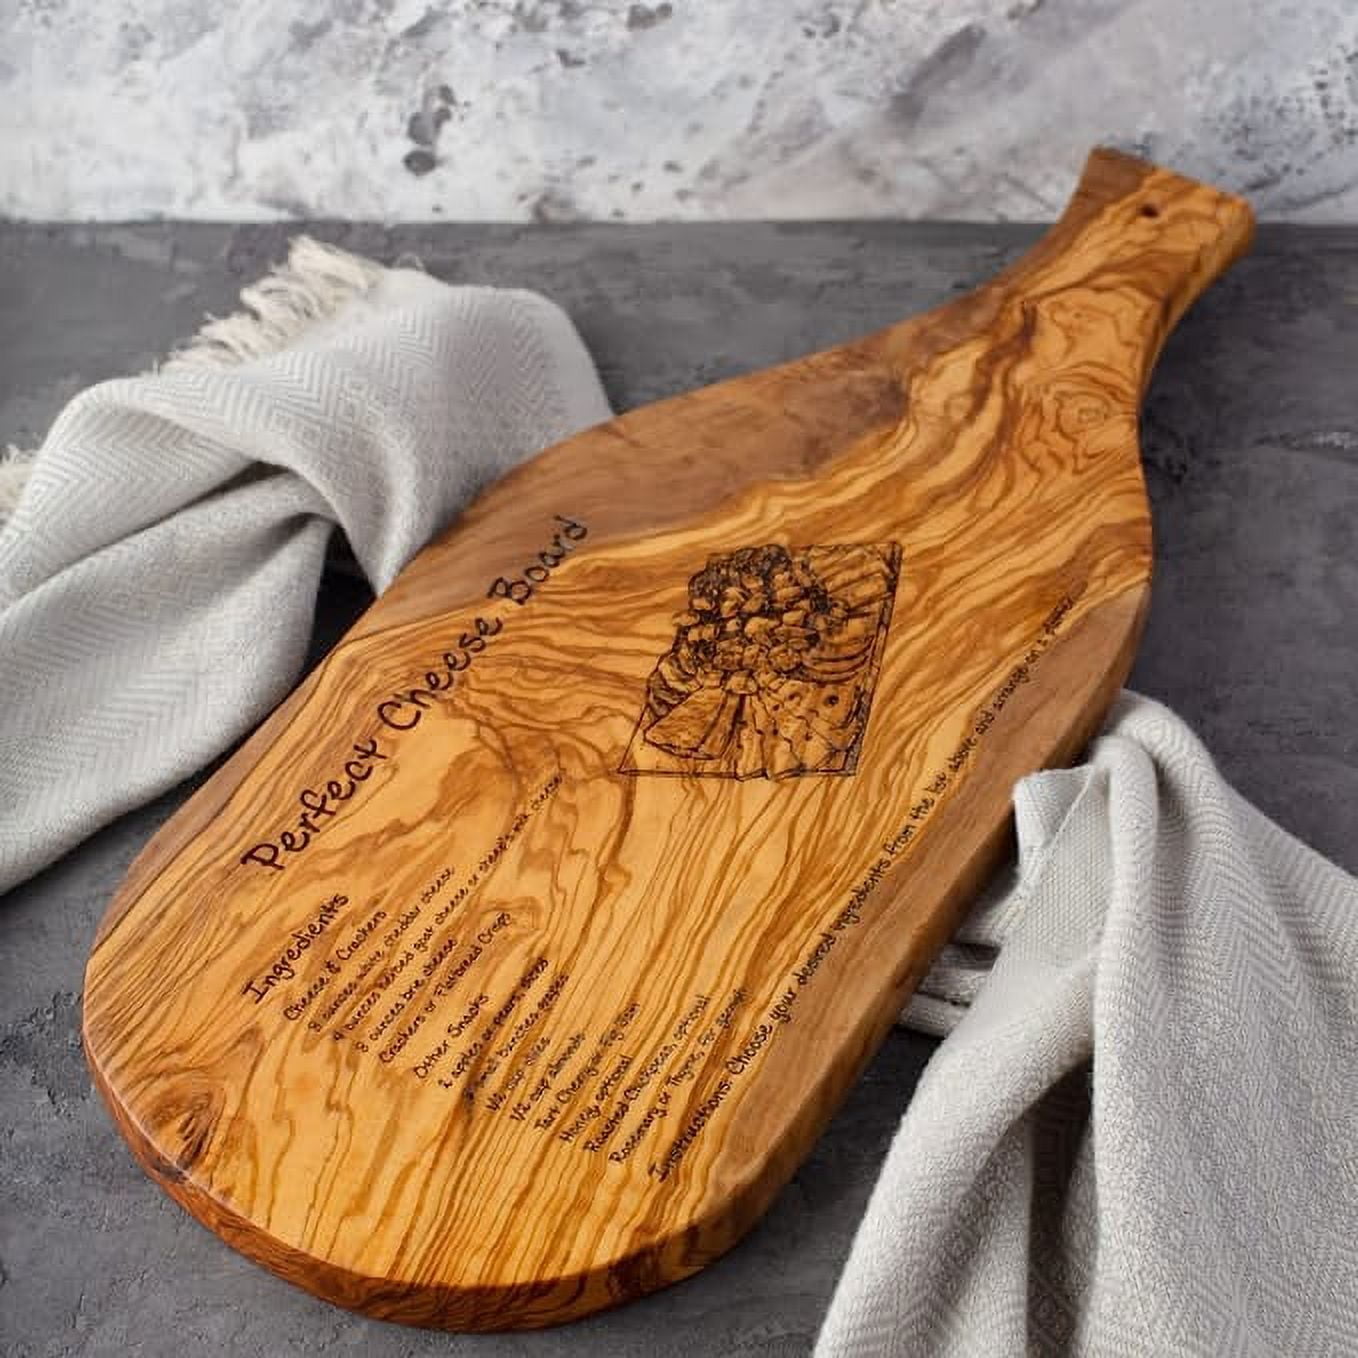 Olive Wood Engraved Recipe Cutting Charcuterie Board, 16 Handmade Cheese &  Serving Board, Premium Chopping Board 